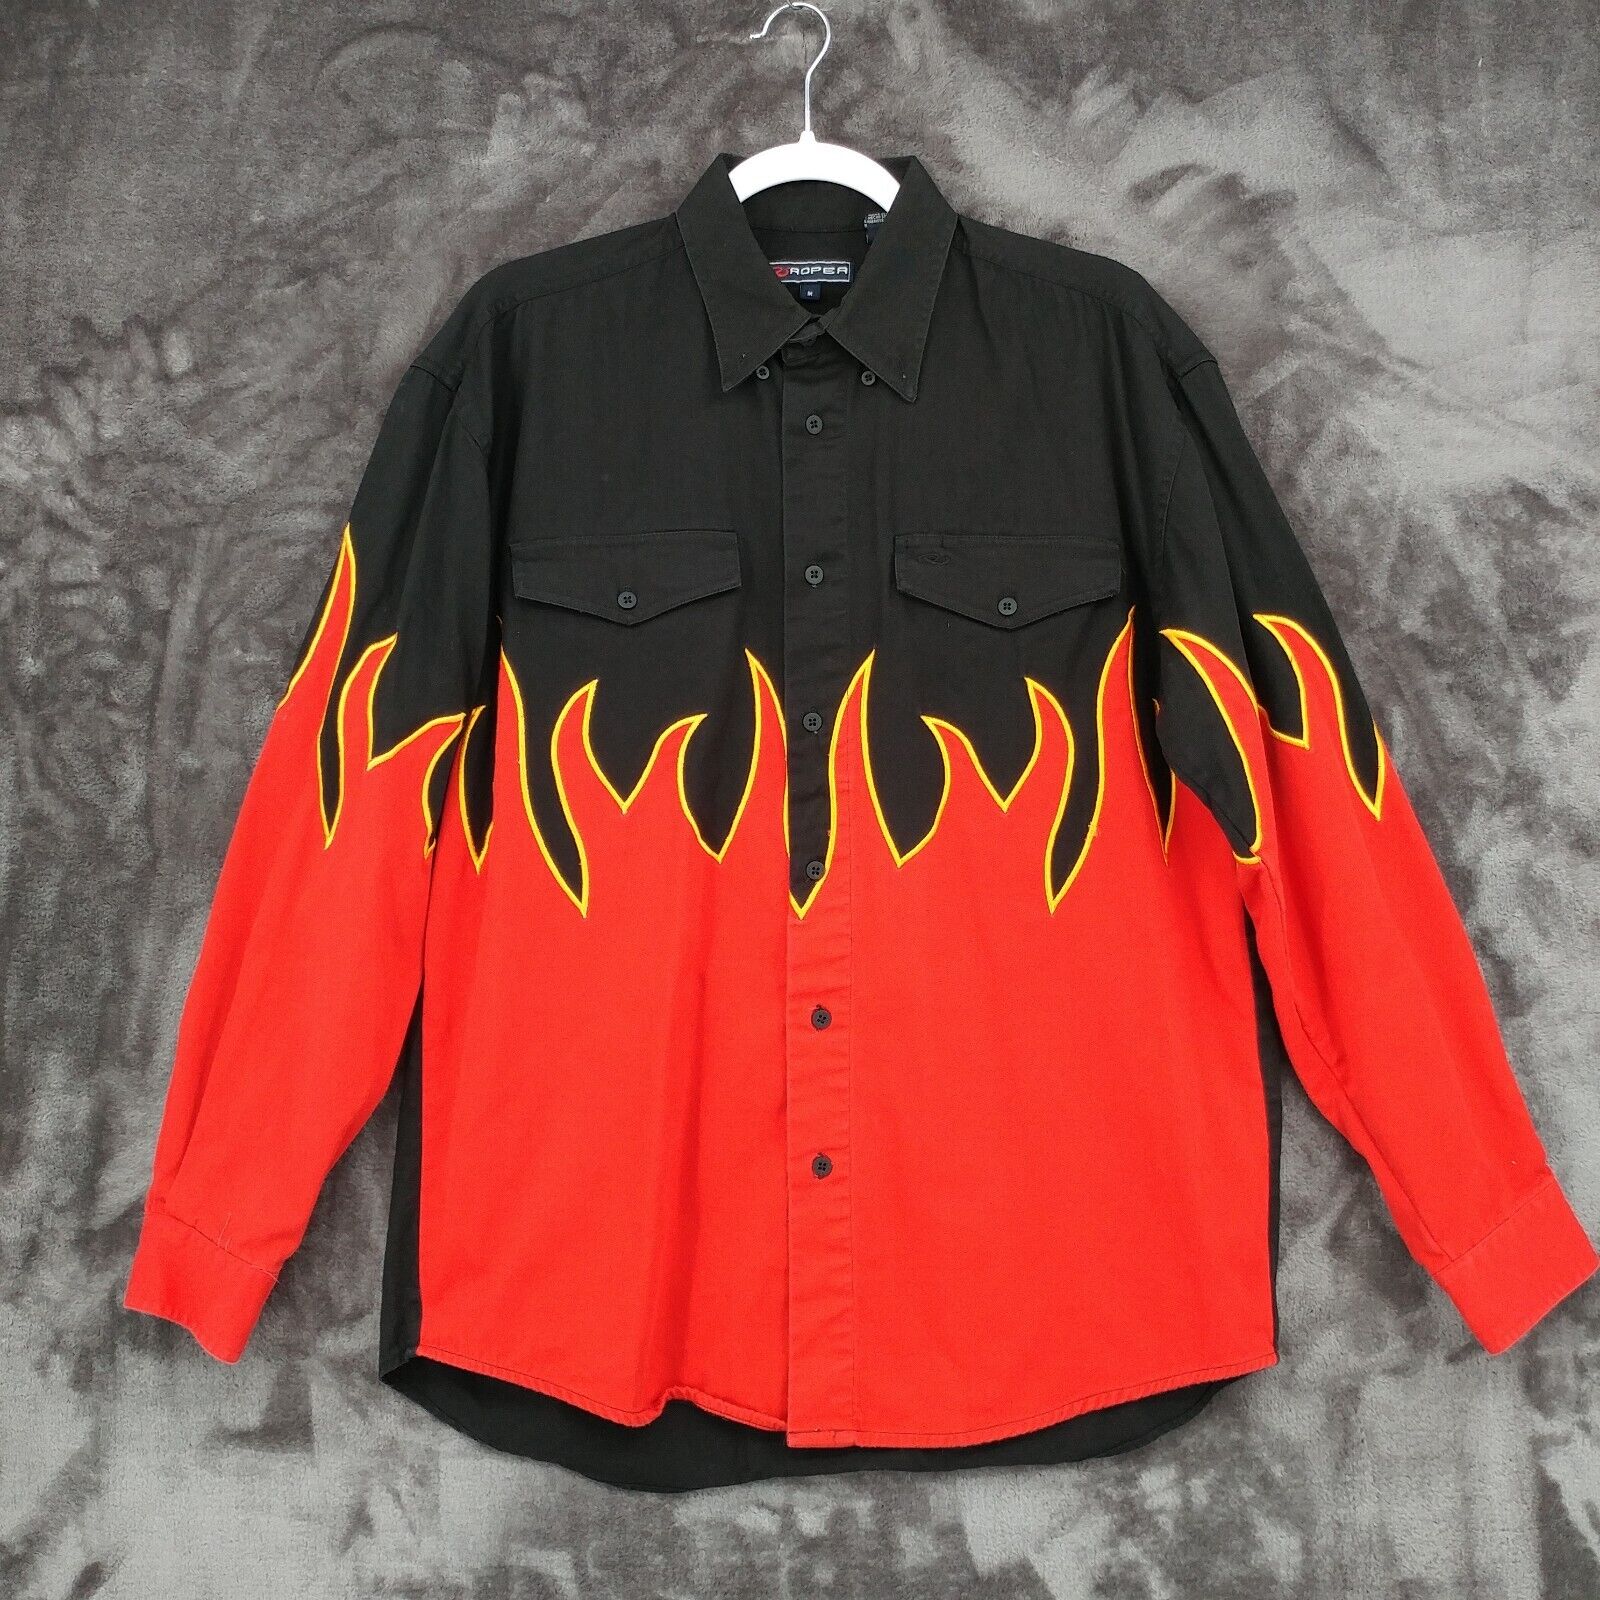 Roper Mens Medium Black Red Flame Embroidered Accent Button Up Cotton Shirt